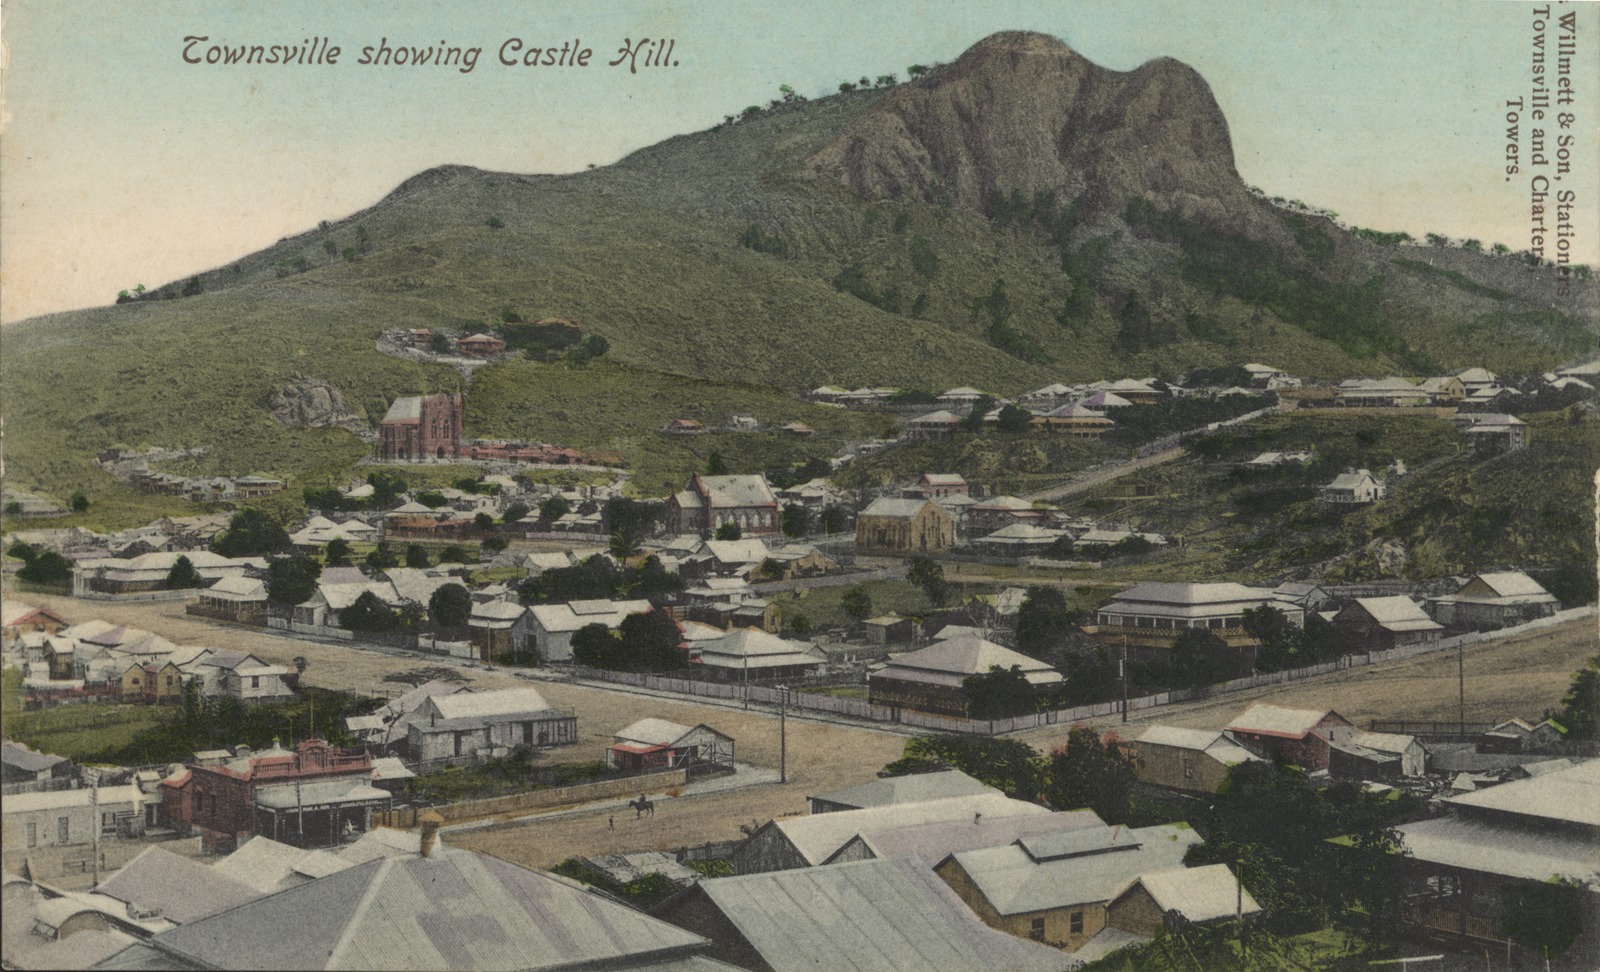  Panoramic view of Townsville showing Castle Hill, ca. 1905